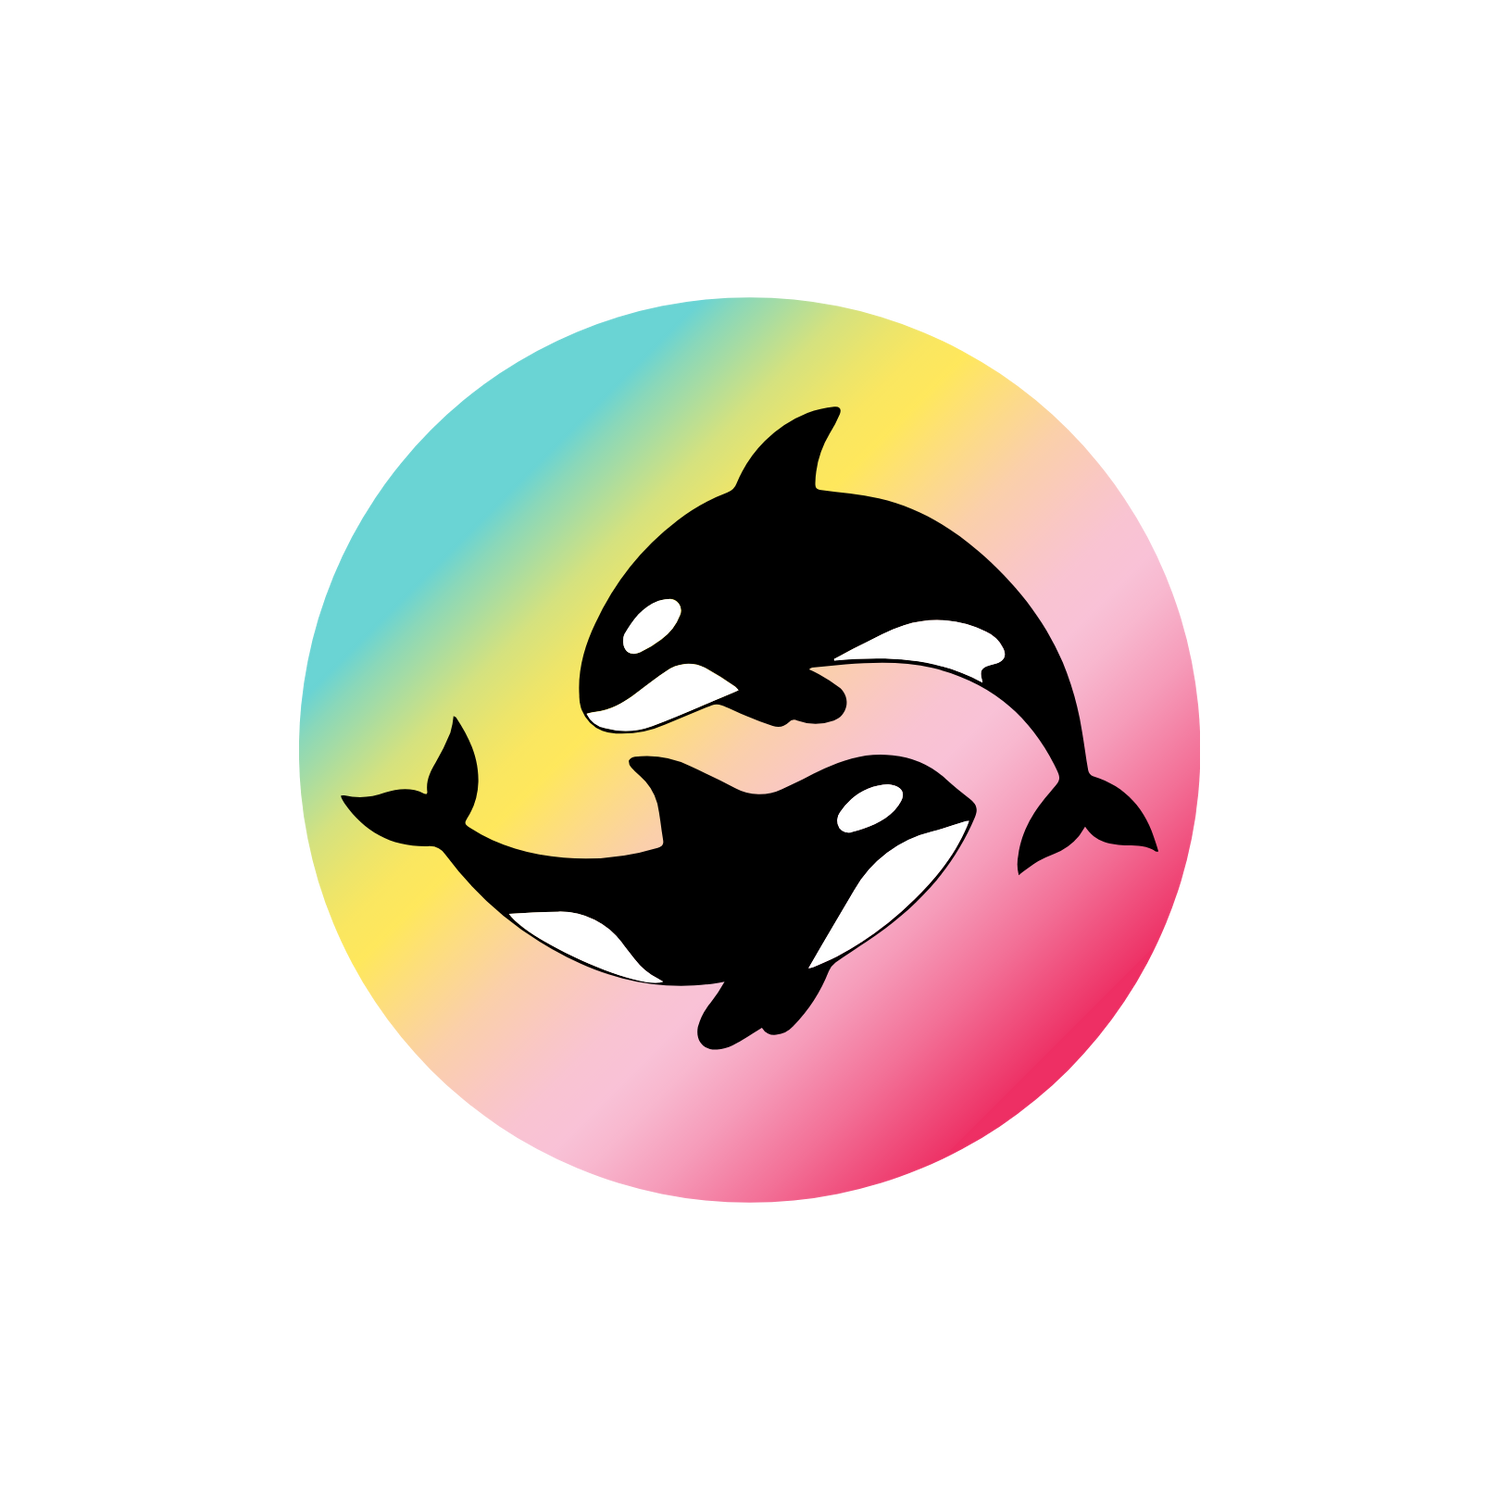 Psychic Sister orca logo with rainbow gradient background.